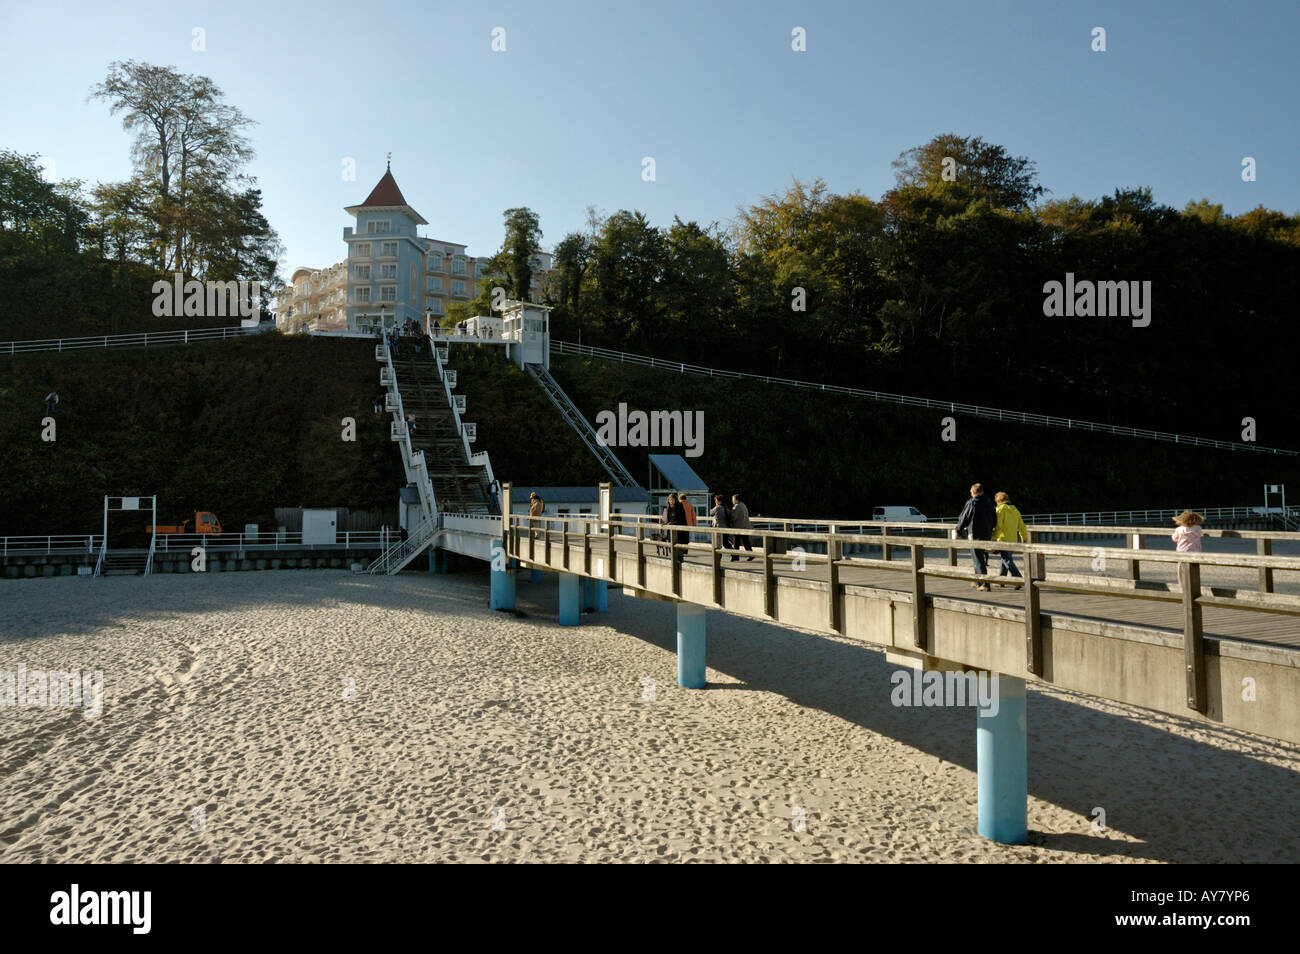 Kurhaus Hotel and 'Jacobs Ladder' stairway to the pier in Ostseebad Sellin, Ruegen, Germany. Stock Photo